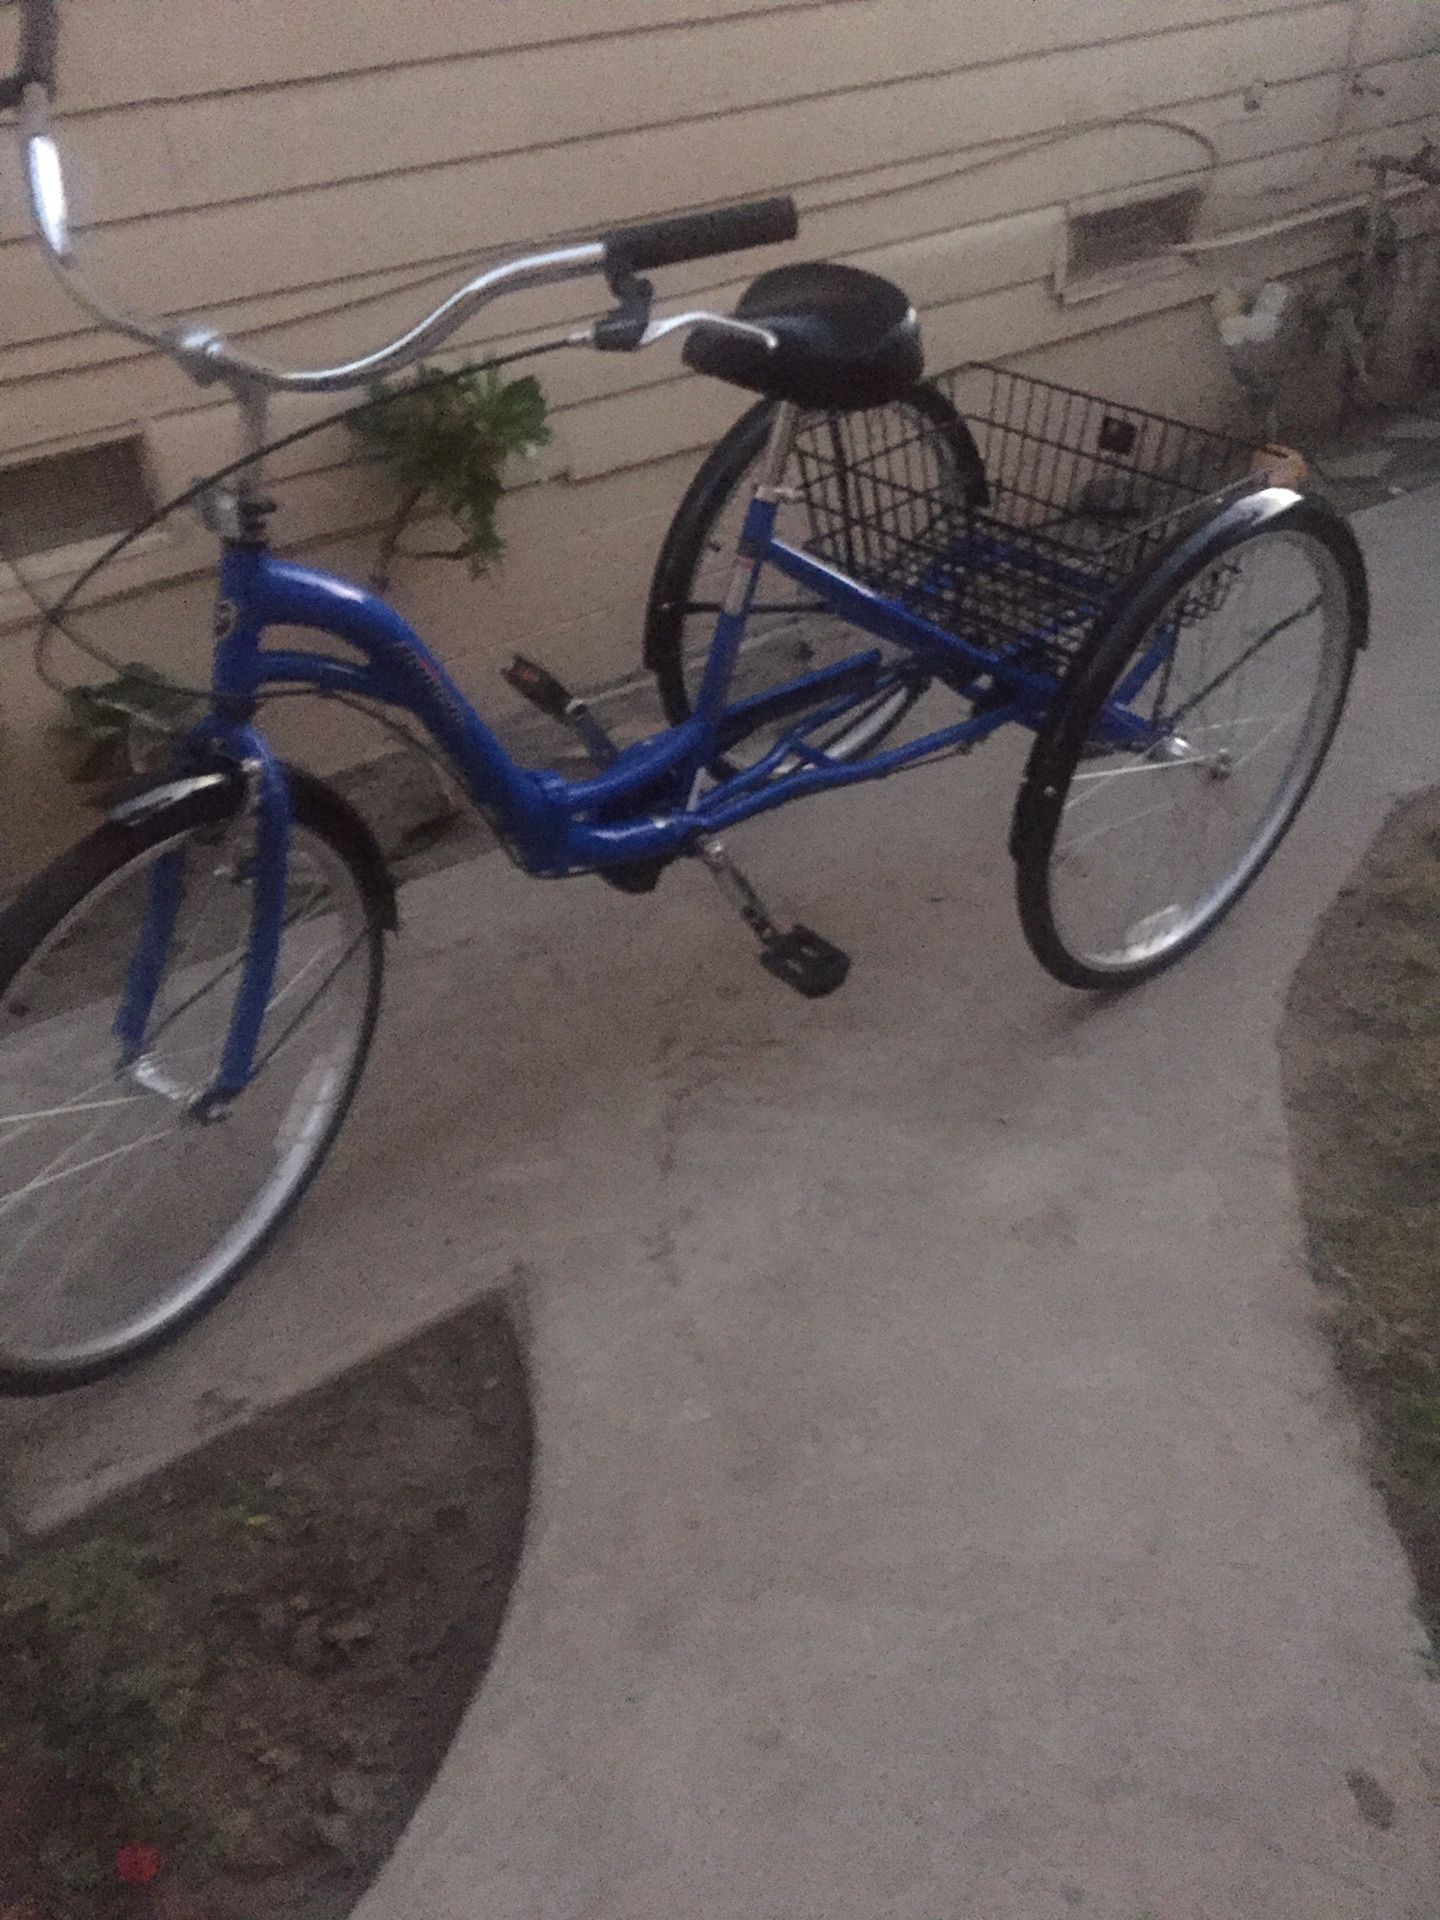 BICYCLE FOLDING THREE WHEEL TRICYCLE $250 NEW KENT ALAMEDA BIKE BLUE WITH BASKET PLEASE SEE PICTURES FOR DETAILS AND CONDITION TEXT FOR ADDRESS WHEN